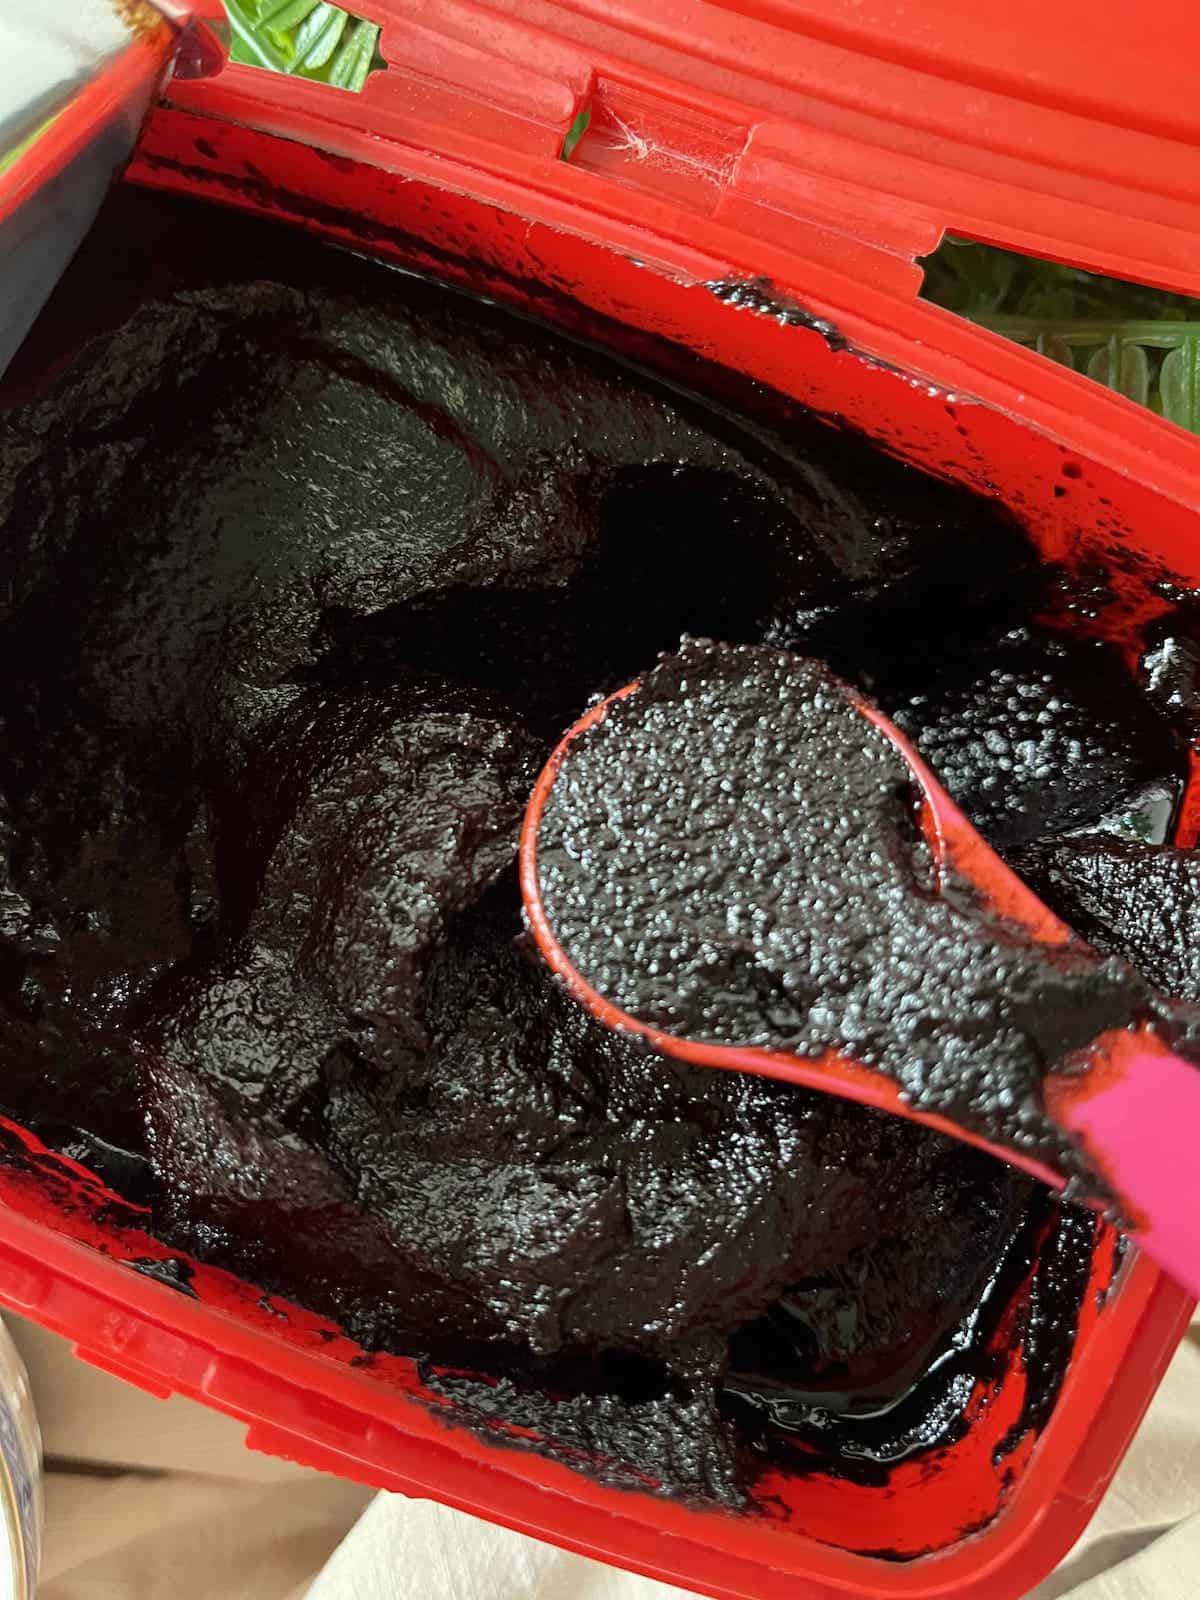 A tub of old Gochujang that has turned black.